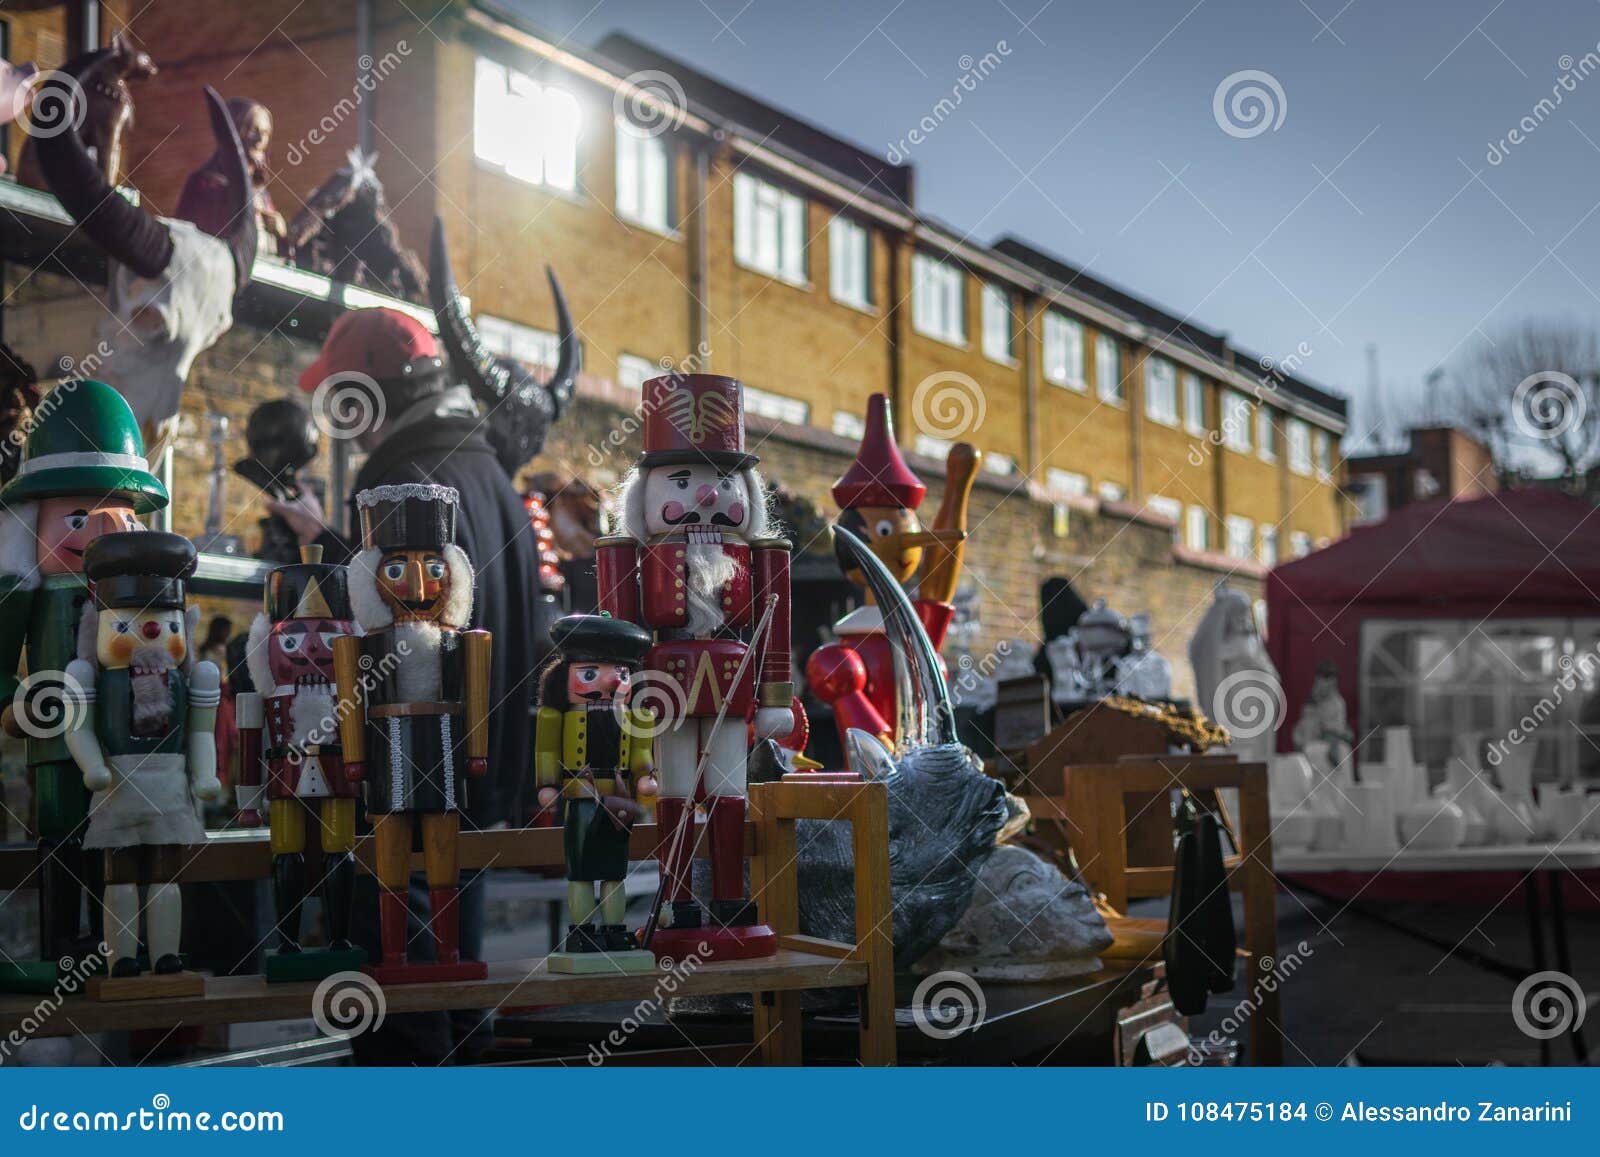 toys and puppets at porto bello road market london